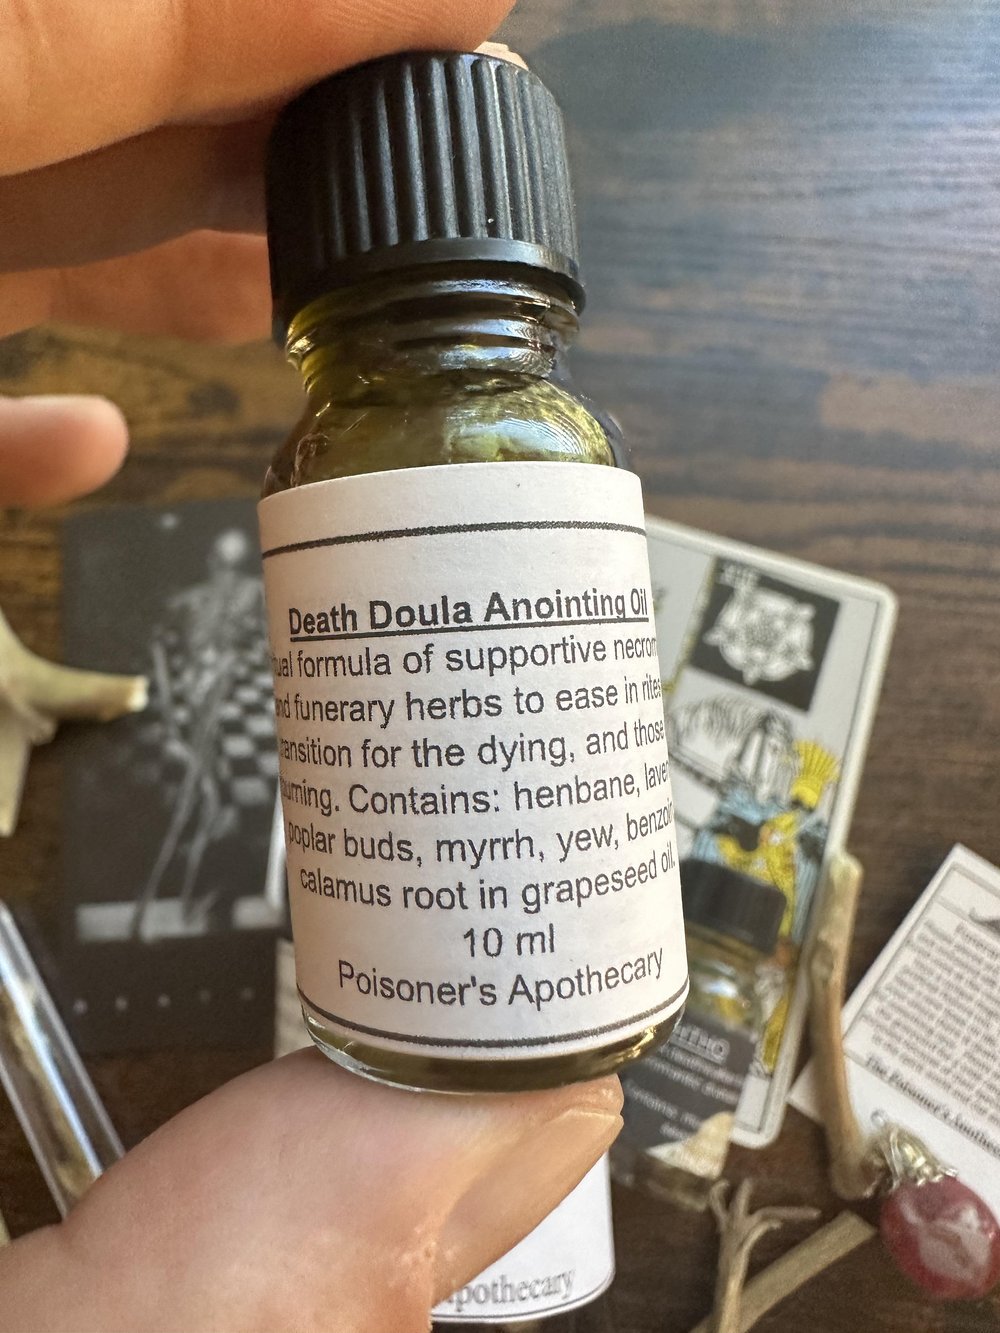 Death Doula Annointing Oil